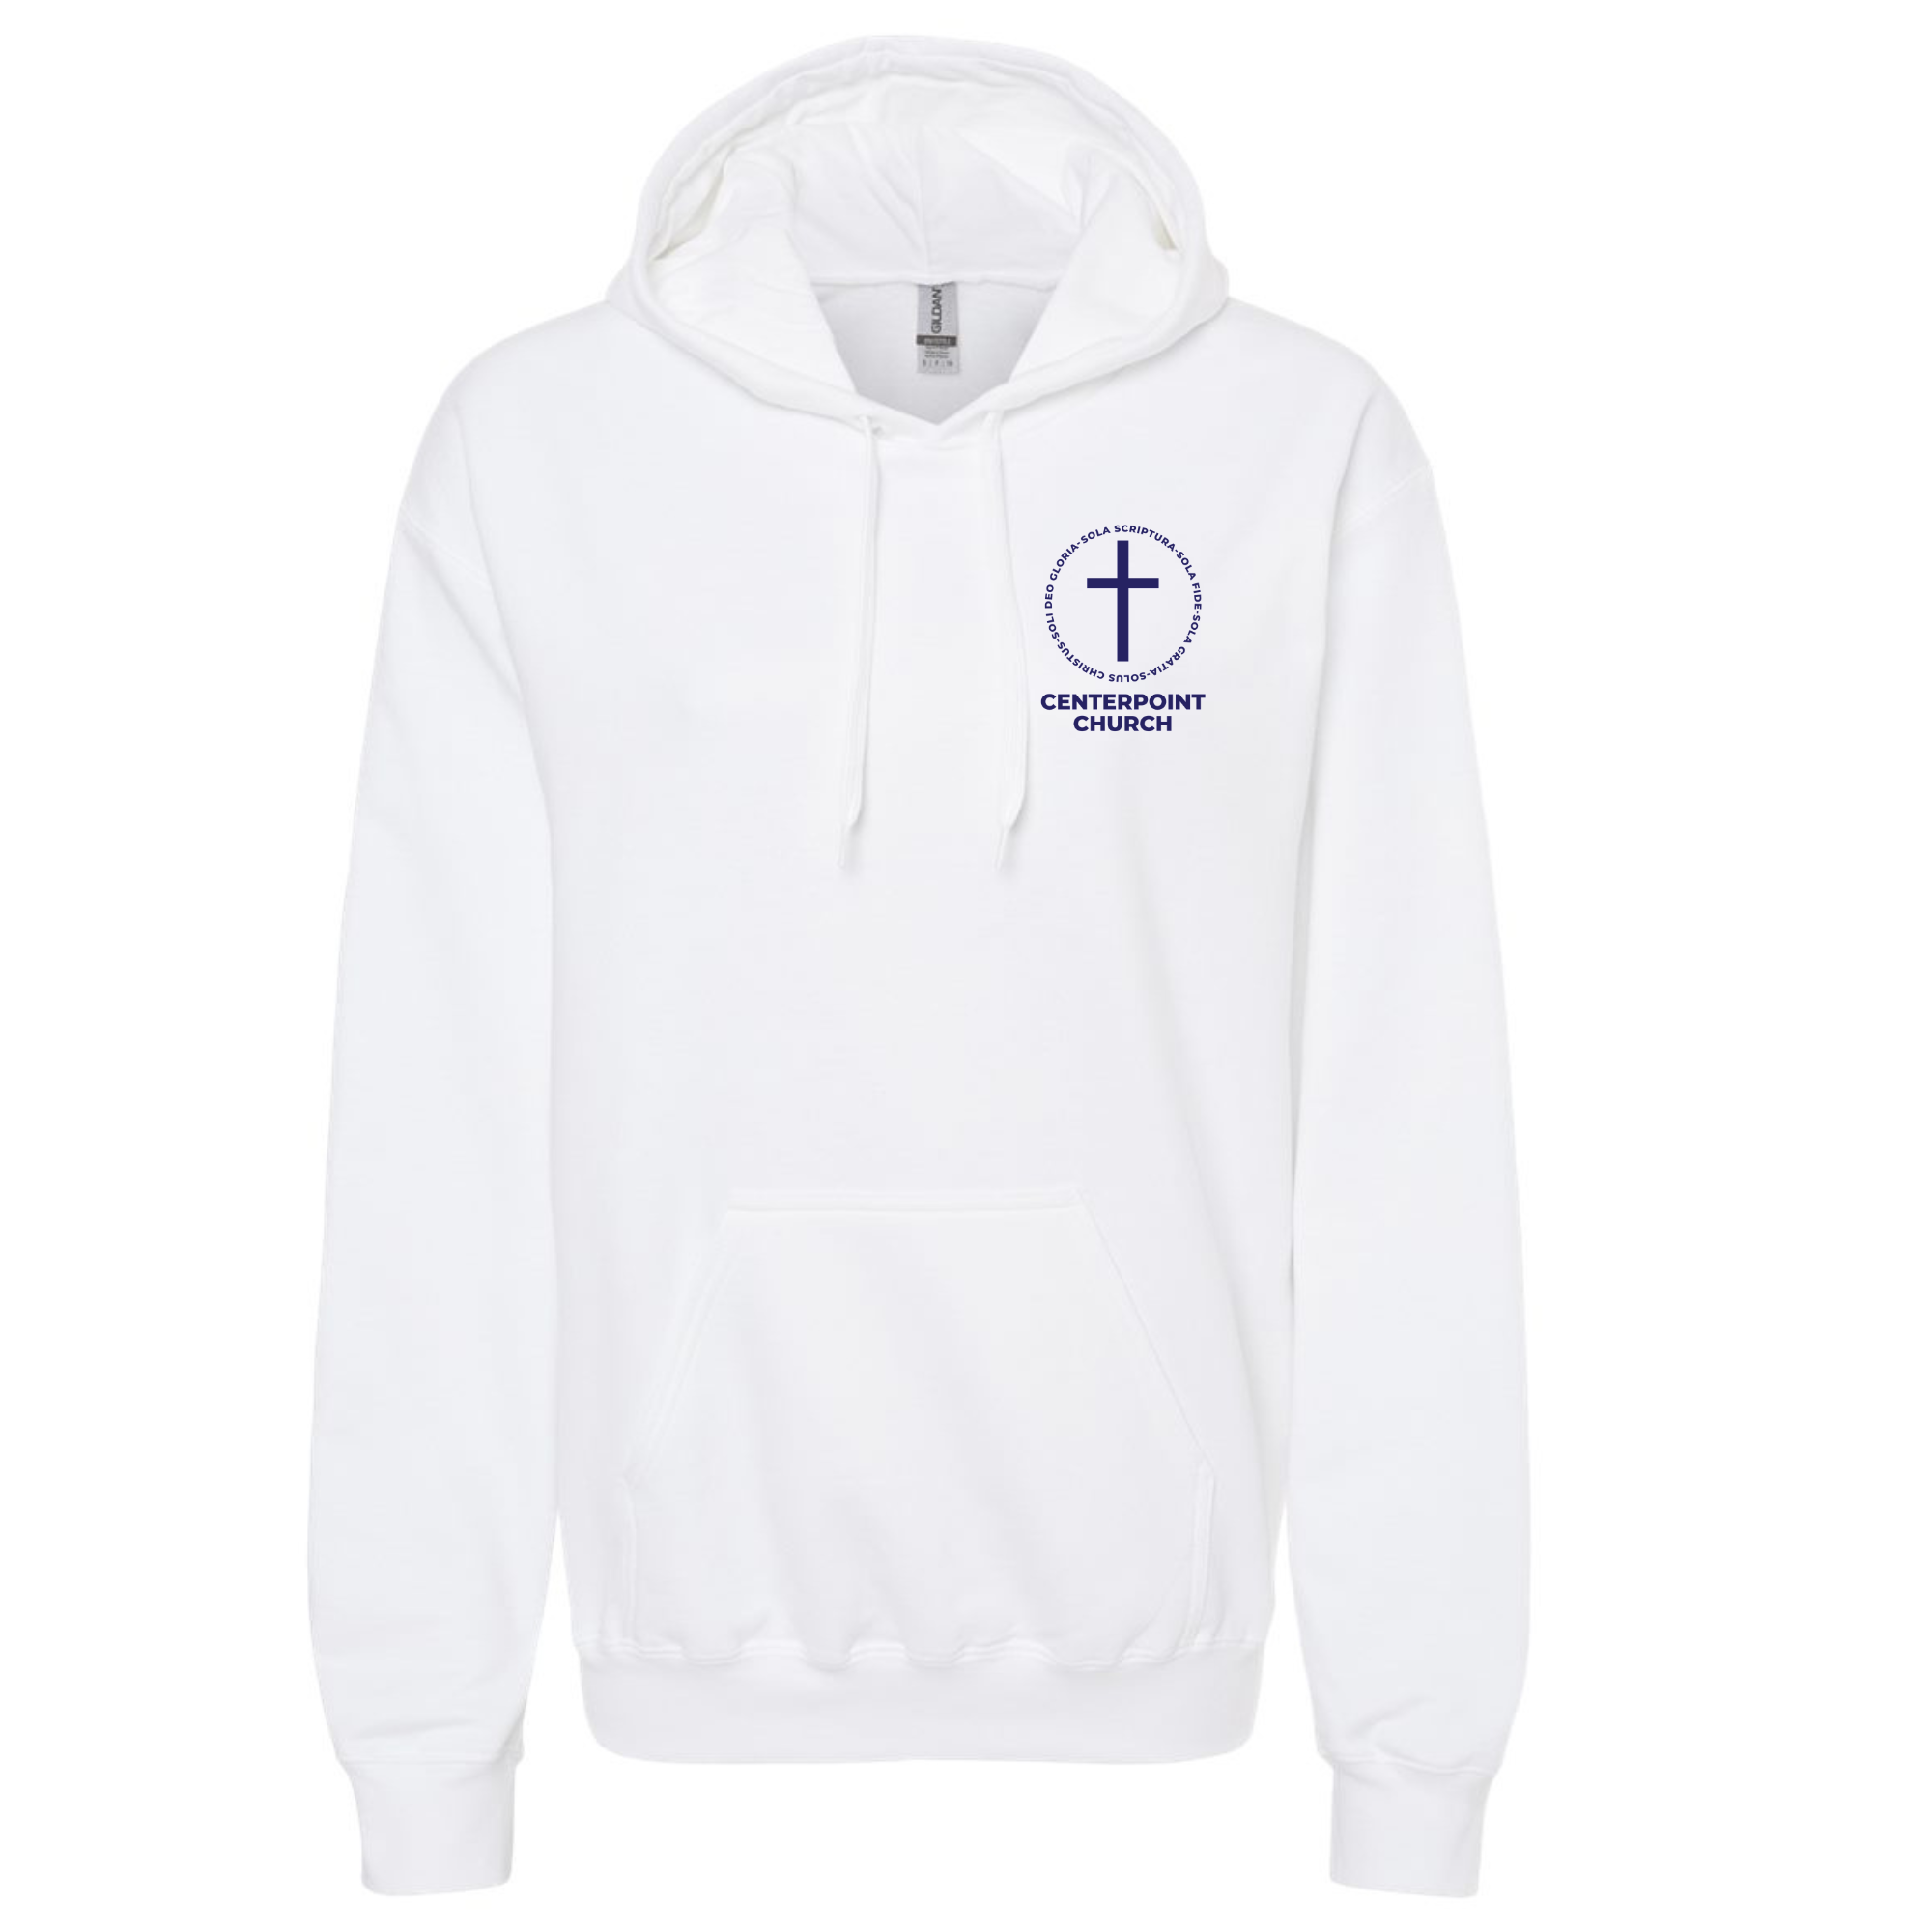 Centerpoint Church Softstyle Hoodie